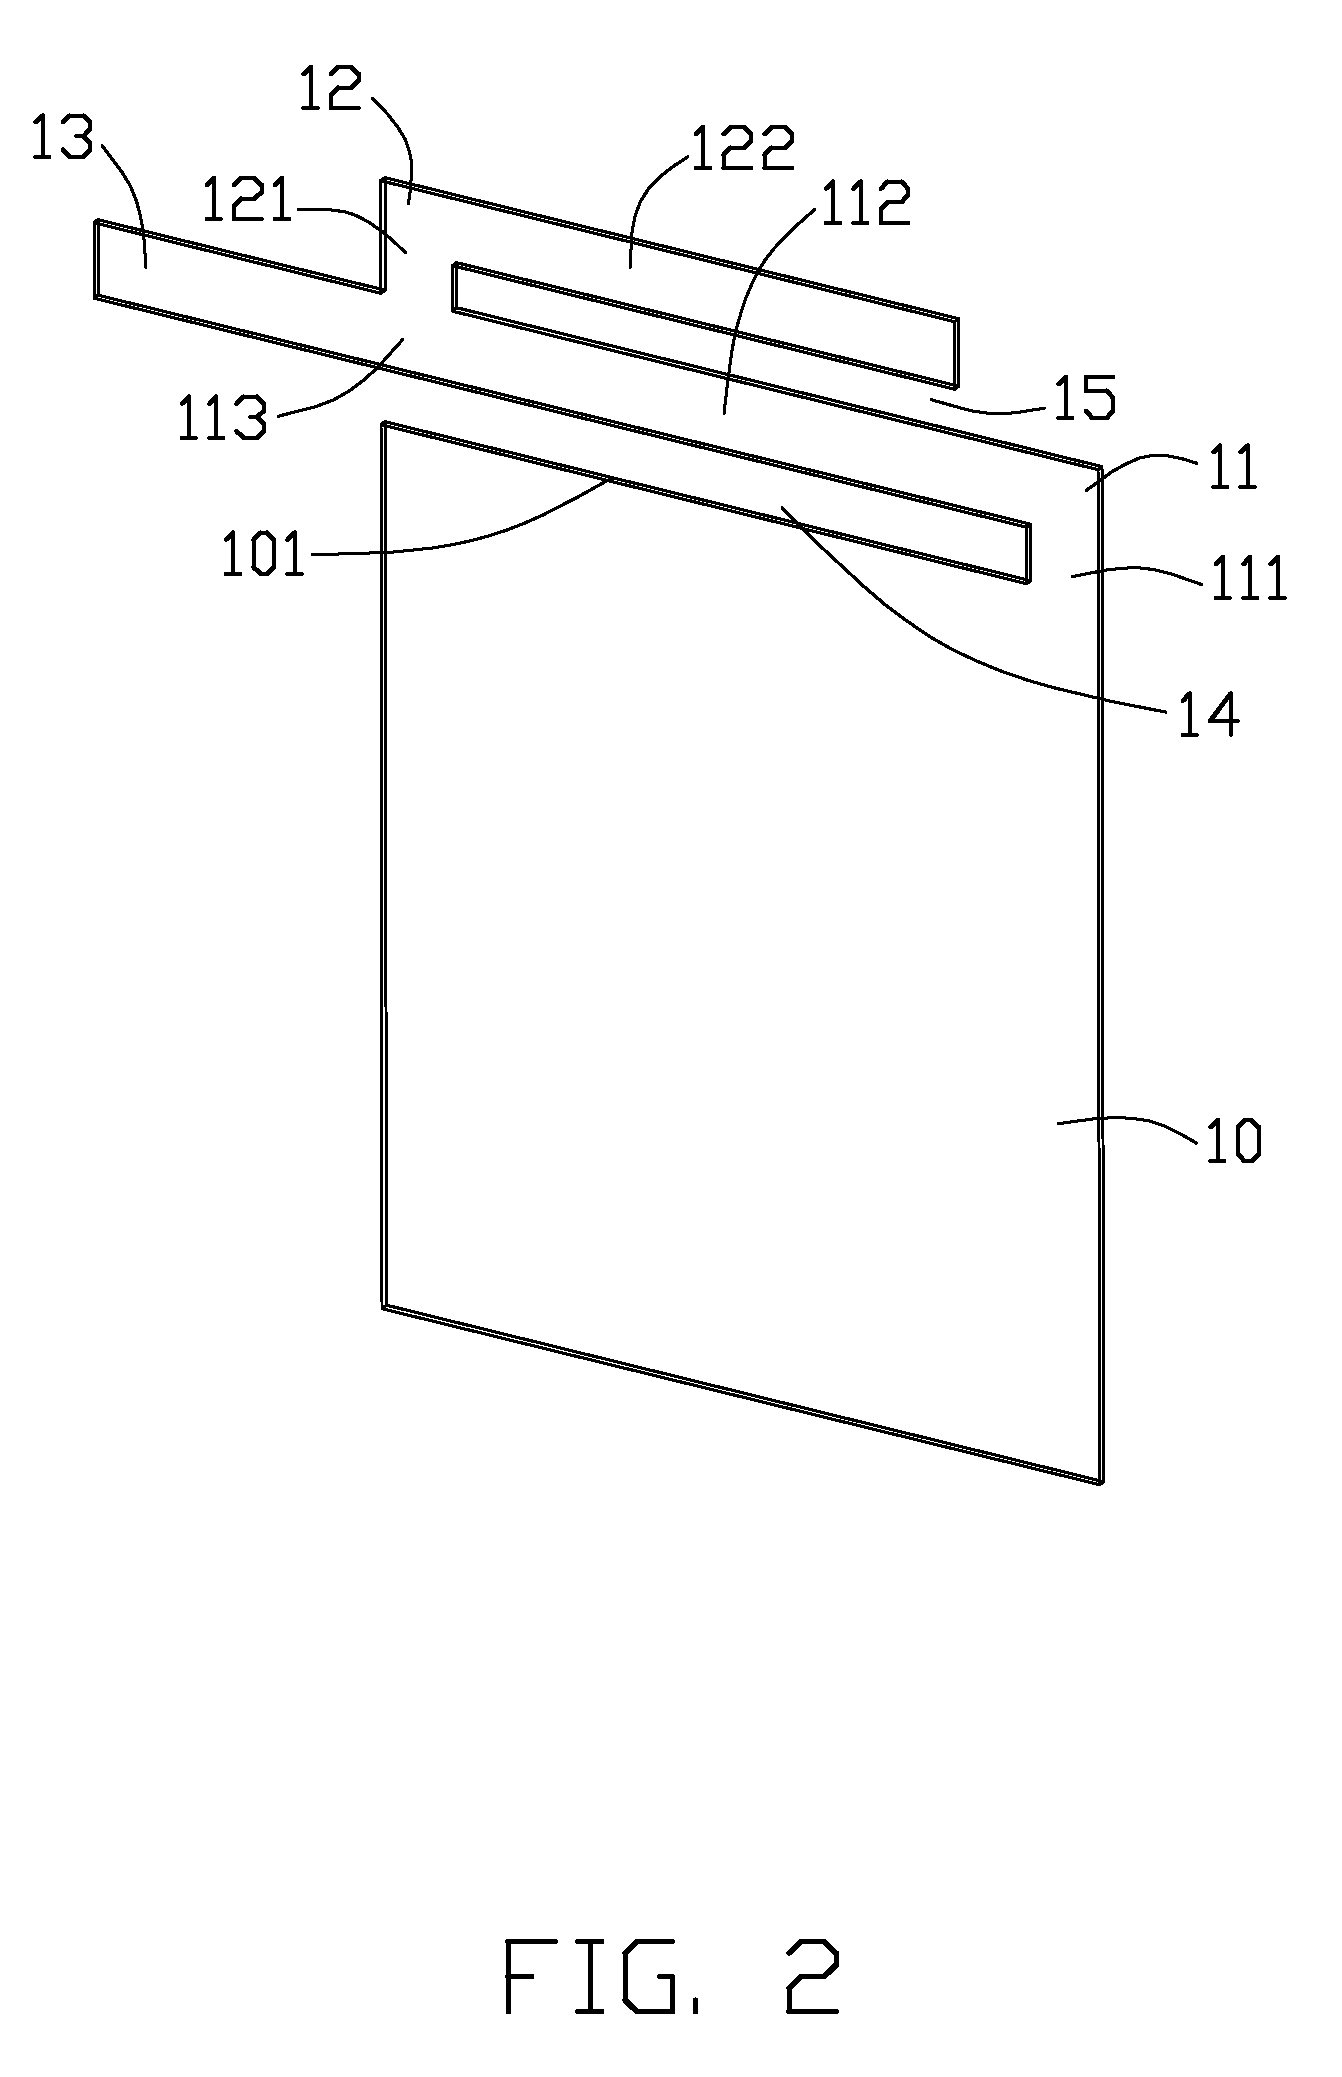 Triple-band antenna with low profile